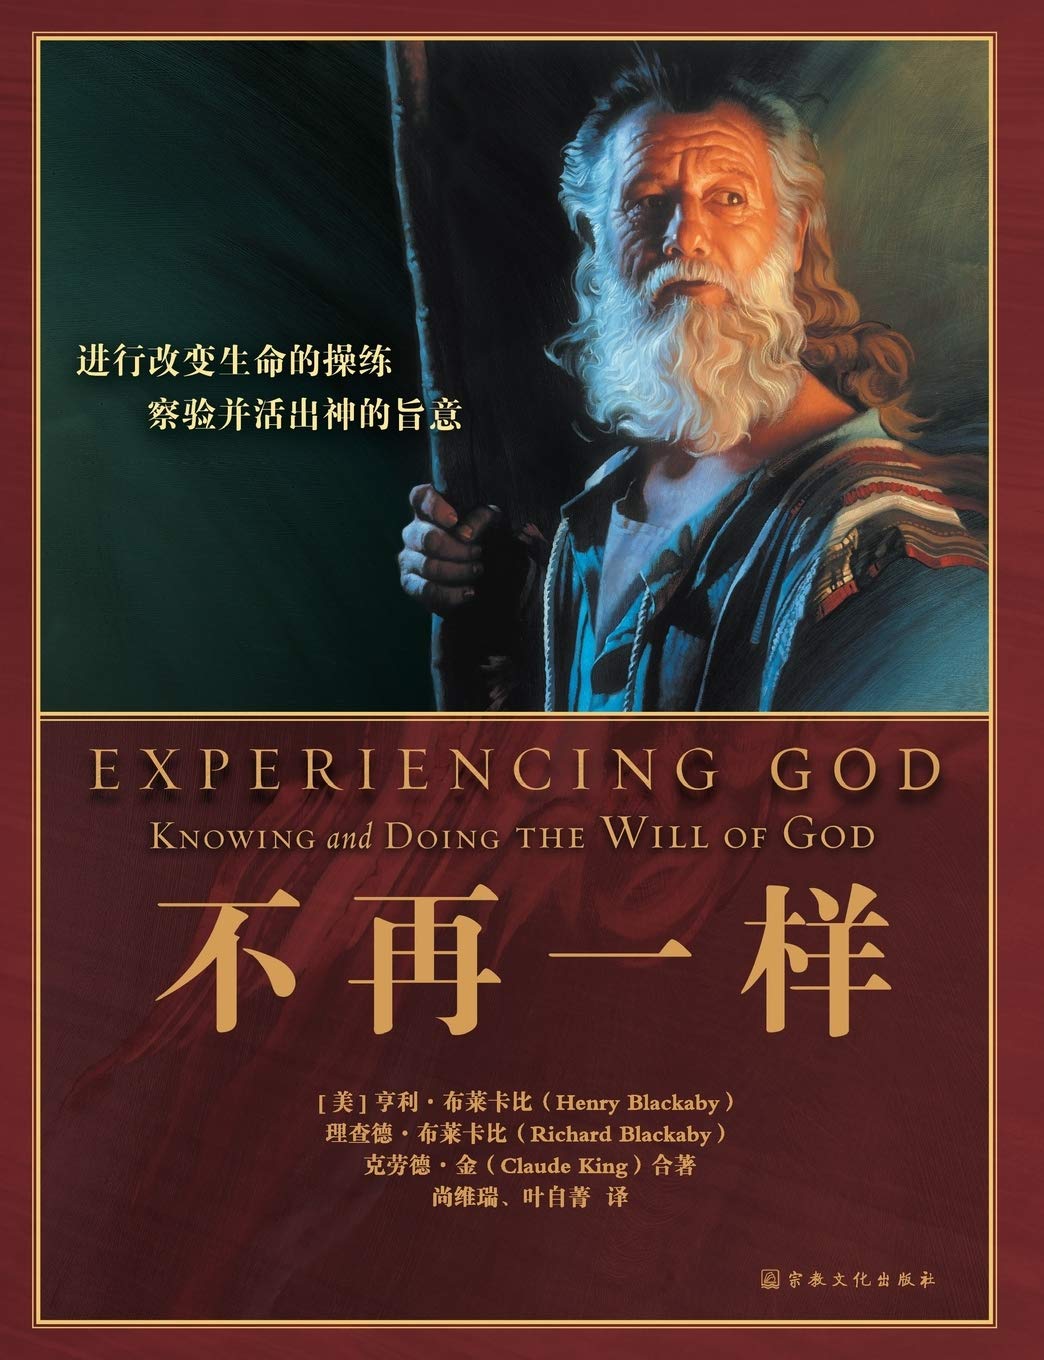 Experiencing God 不再一样: Knowing and Doing the Will of God (Chinese Edition)